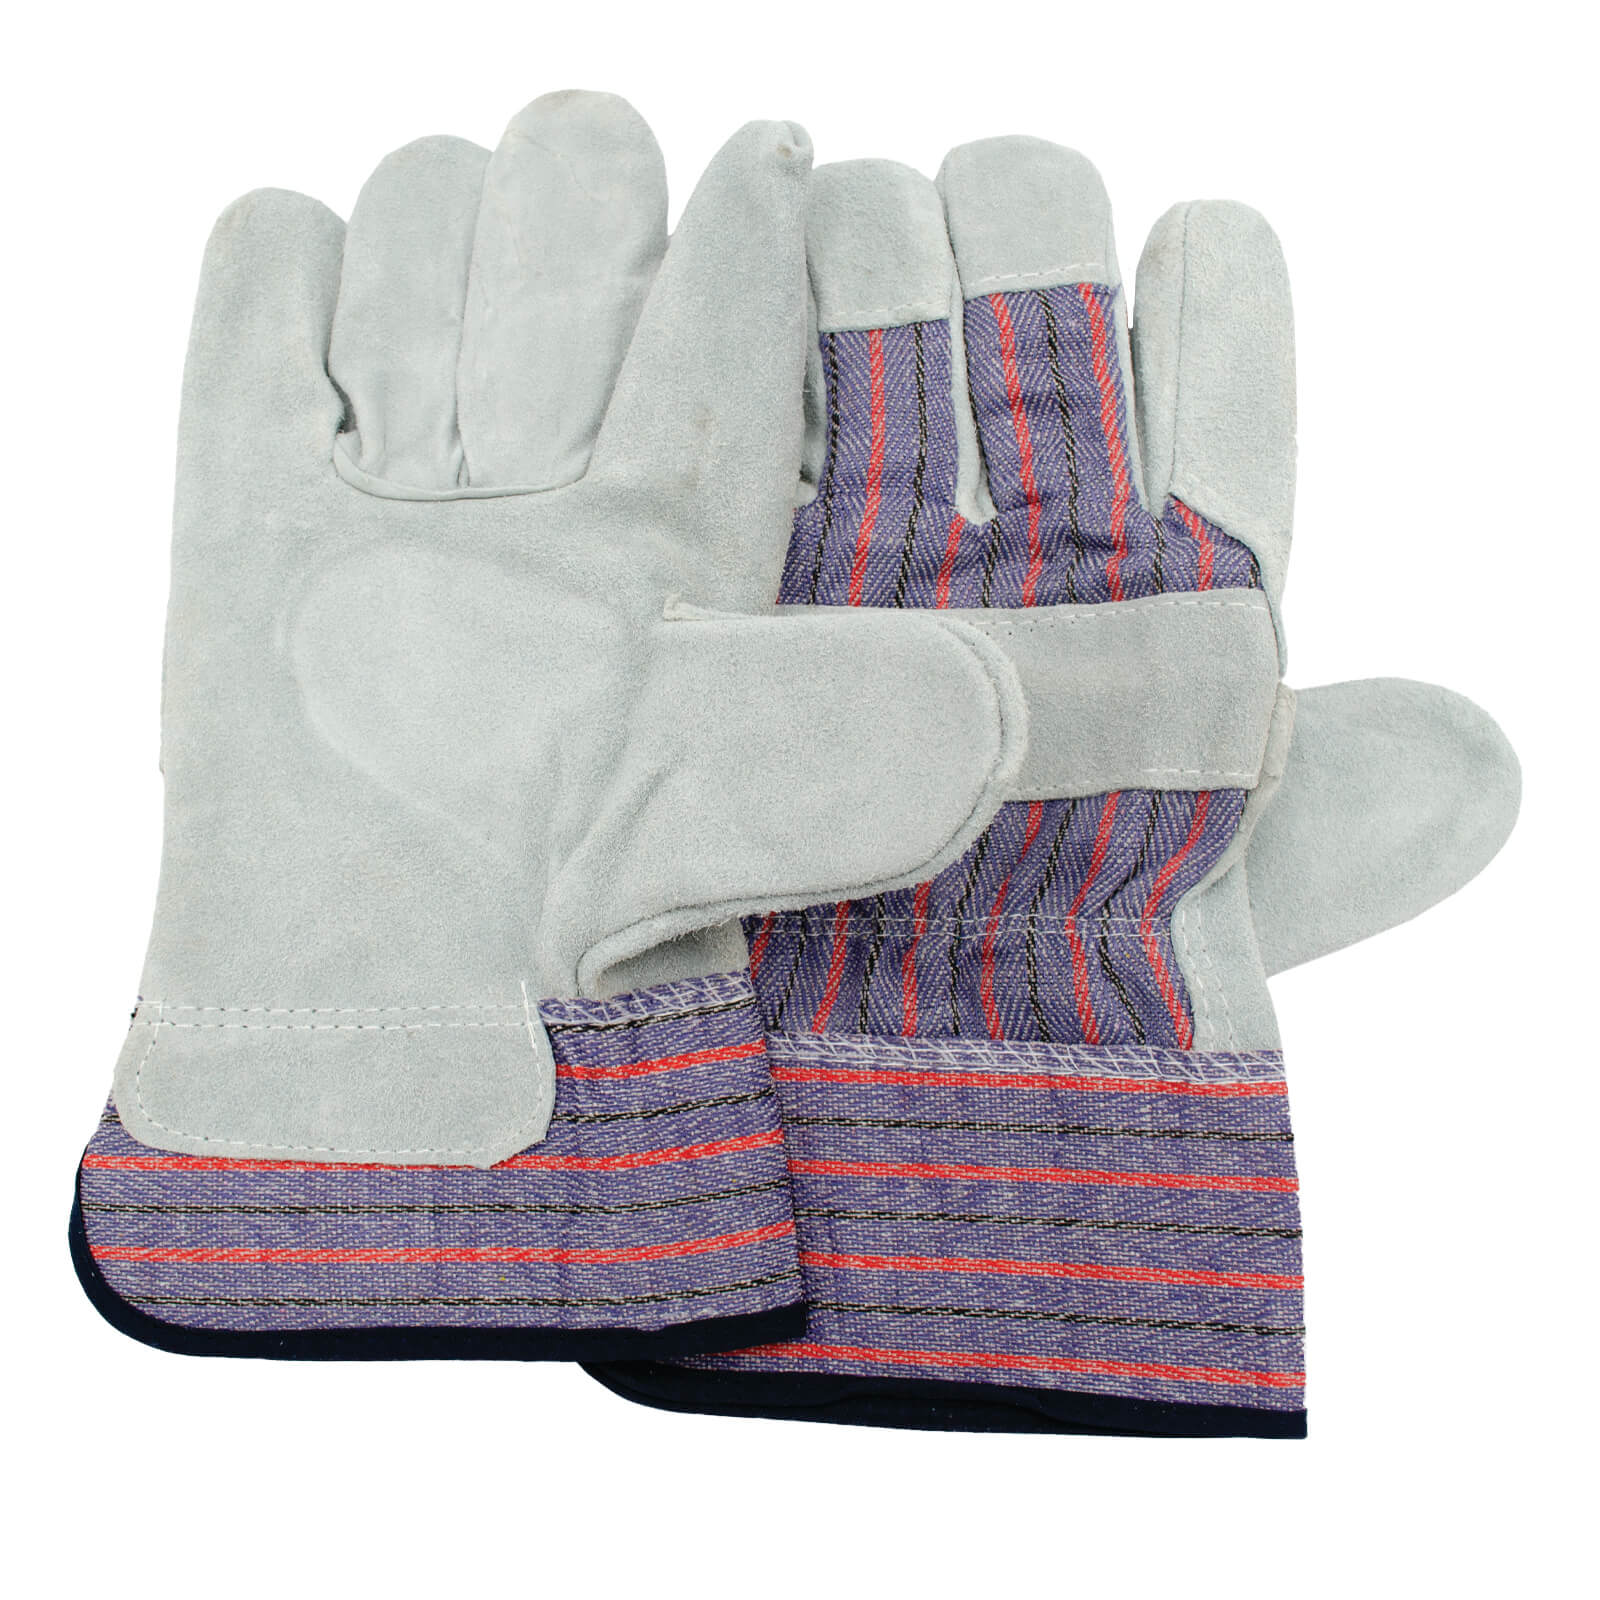 Big Mikes by Stonebreaker Leather Riggers Gloves - One Size